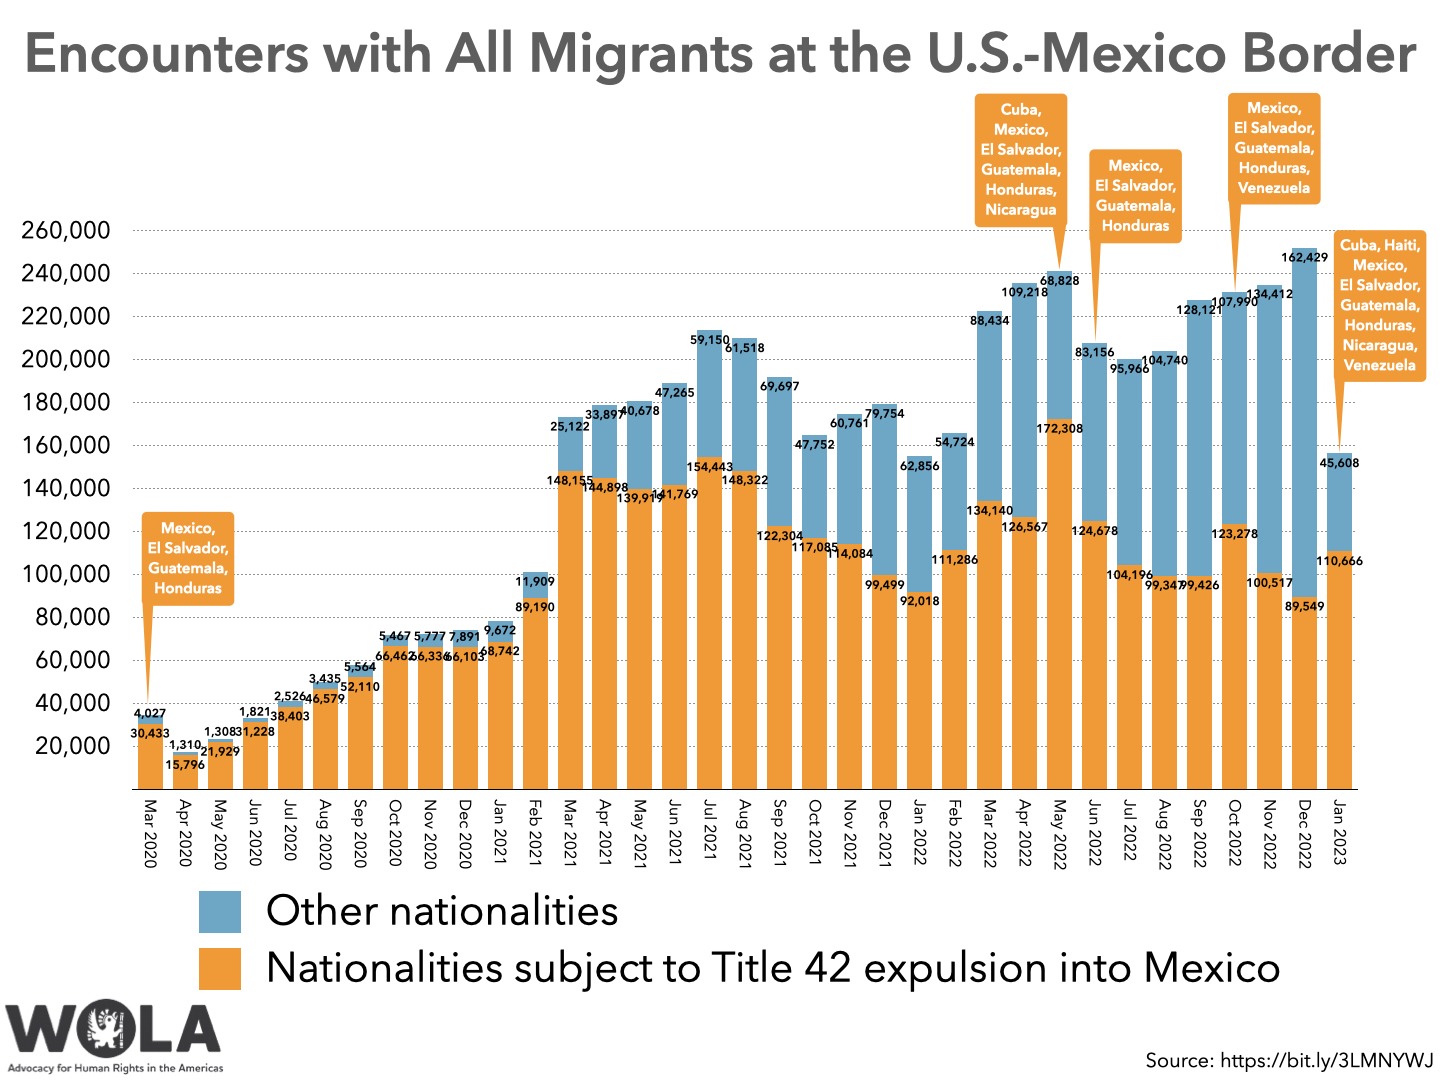 Chart: Encounters with All Migrants at the U.S.-Mexico Border Mar 2020 Apr 2020 May 2020 Jun 2020 Jul 2020 Aug 2020 Sep 2020 Oct 2020 Nov 2020 Dec 2020 Jan 2021 Feb 2021 Mar 2021 Apr 2021 May 2021 Jun 2021 Jul 2021 Aug 2021 Sep 2021 Oct 2021 Nov 2021 Dec 2021 Jan 2022 Feb 2022 Mar 2022 Apr 2022 May 2022 Jun 2022 Jul 2022 Aug 2022 Sep 2022 Oct 2022 Nov 2022 Dec 2022 Jan 2023 Nationalities subject to Title 42 expulsion into Mexico 30433 15796 21929 31228 38403 46579 52110 66462 66336 66103 68742 89190 148155 144898 139919 141769 154443 148322 122304 117085 114084 99499 92018 111286 134140 126567 172308 124678 104196 99347 99426 123278 100517 89549 110666 Other nationalities 4027 1310 1308 1821 2526 3435 5564 5467 5777 7891 9672 11909 25122 33897 40678 47265 59150 61518 69697 47752 60761 79754 62856 54724 88434 109218 68828 83156 95966 104740 128121 107990 134412 162429 45608